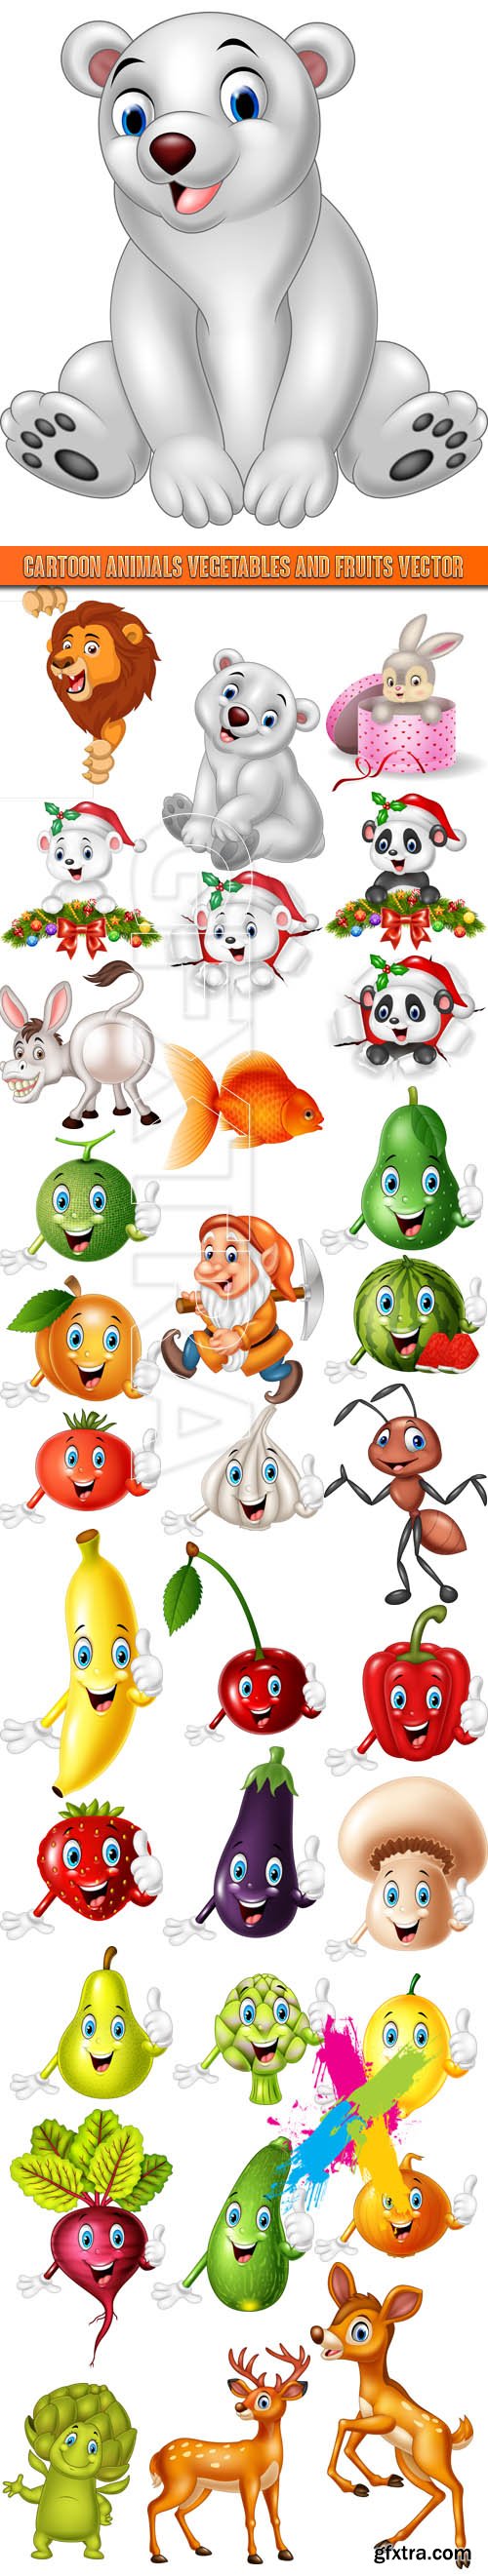 Cartoon animals vegetables and fruits vector